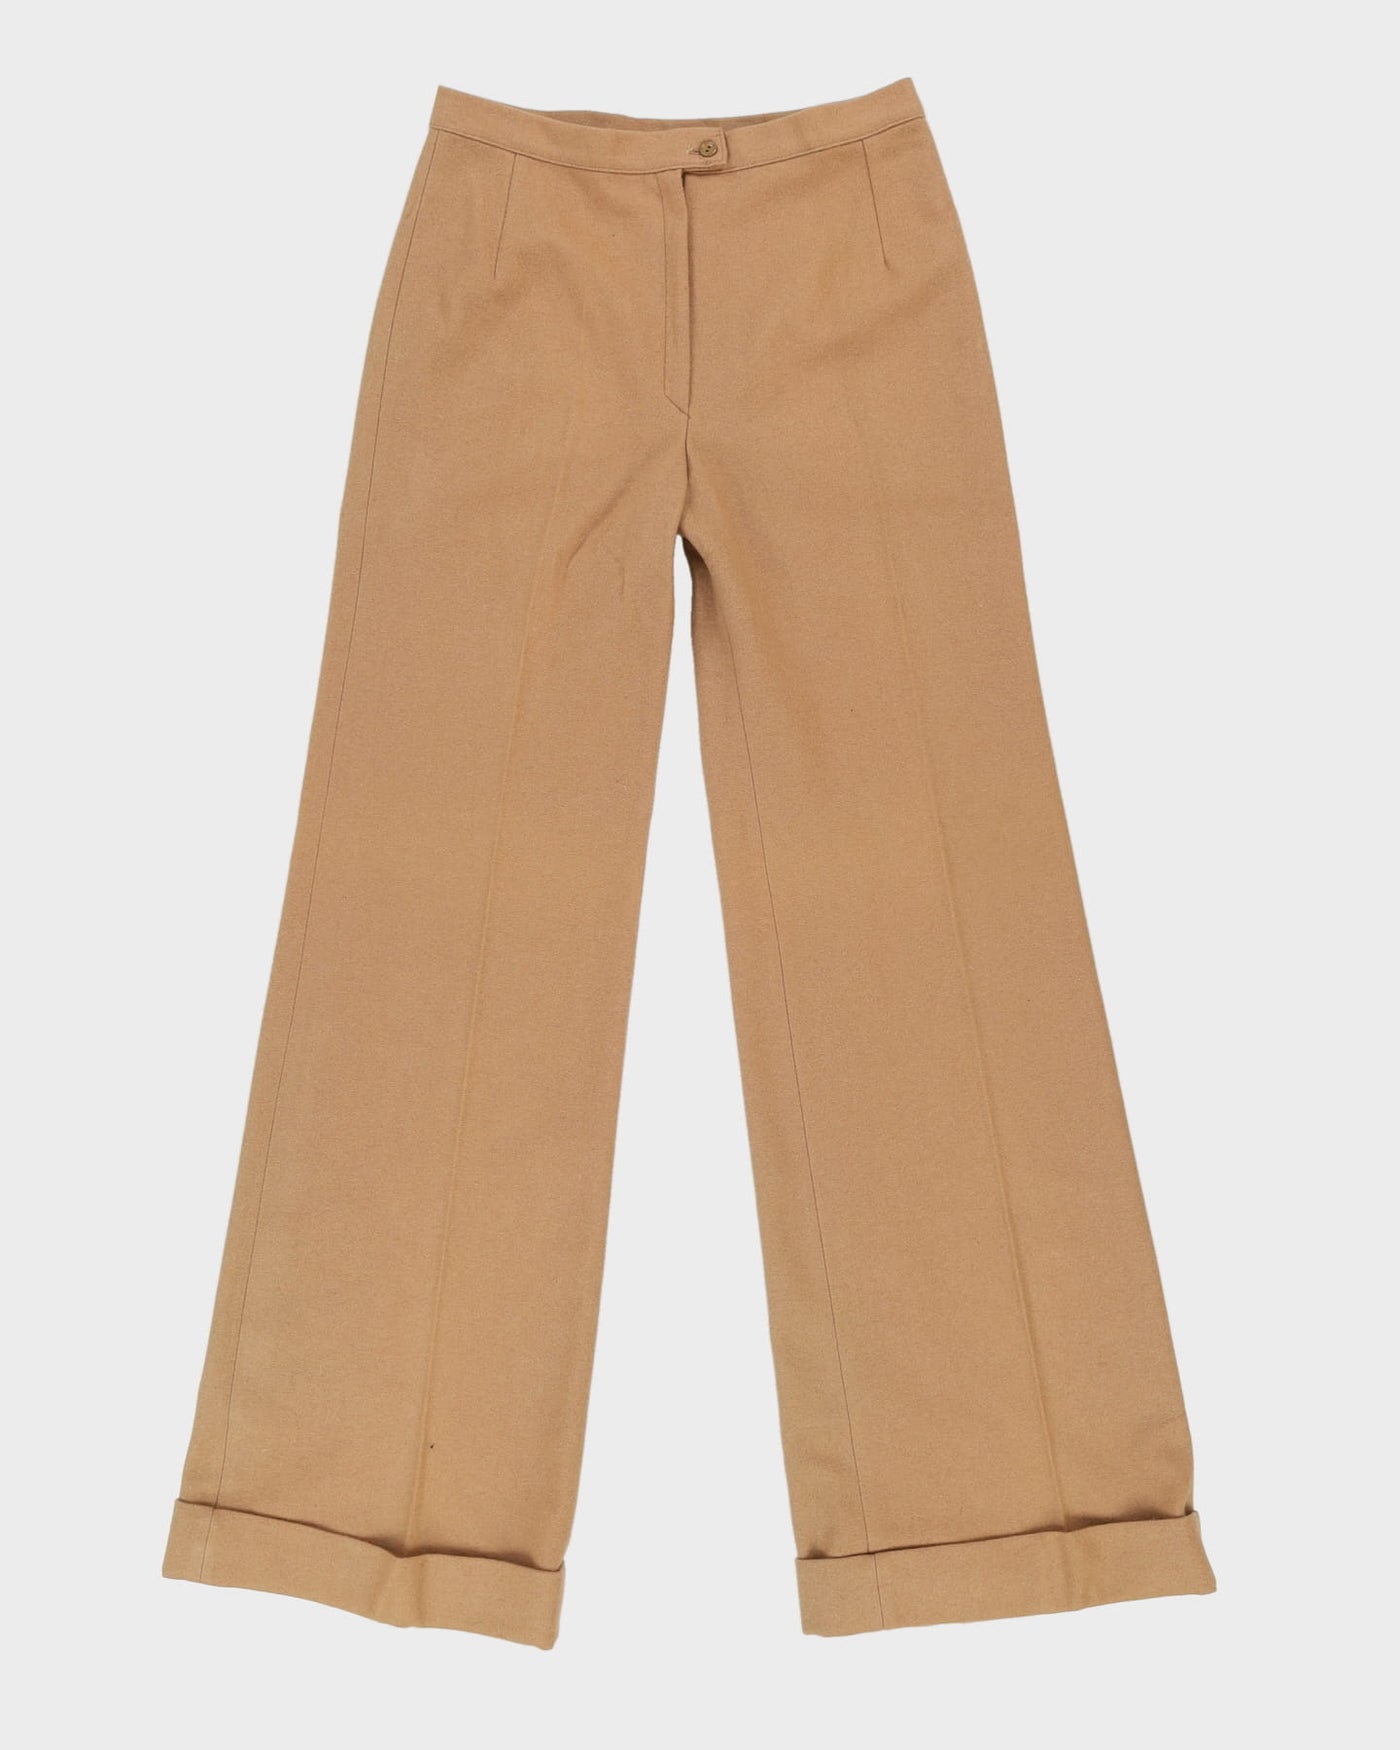 Vintage 1970s Brown Flared Trousers - W27 L32